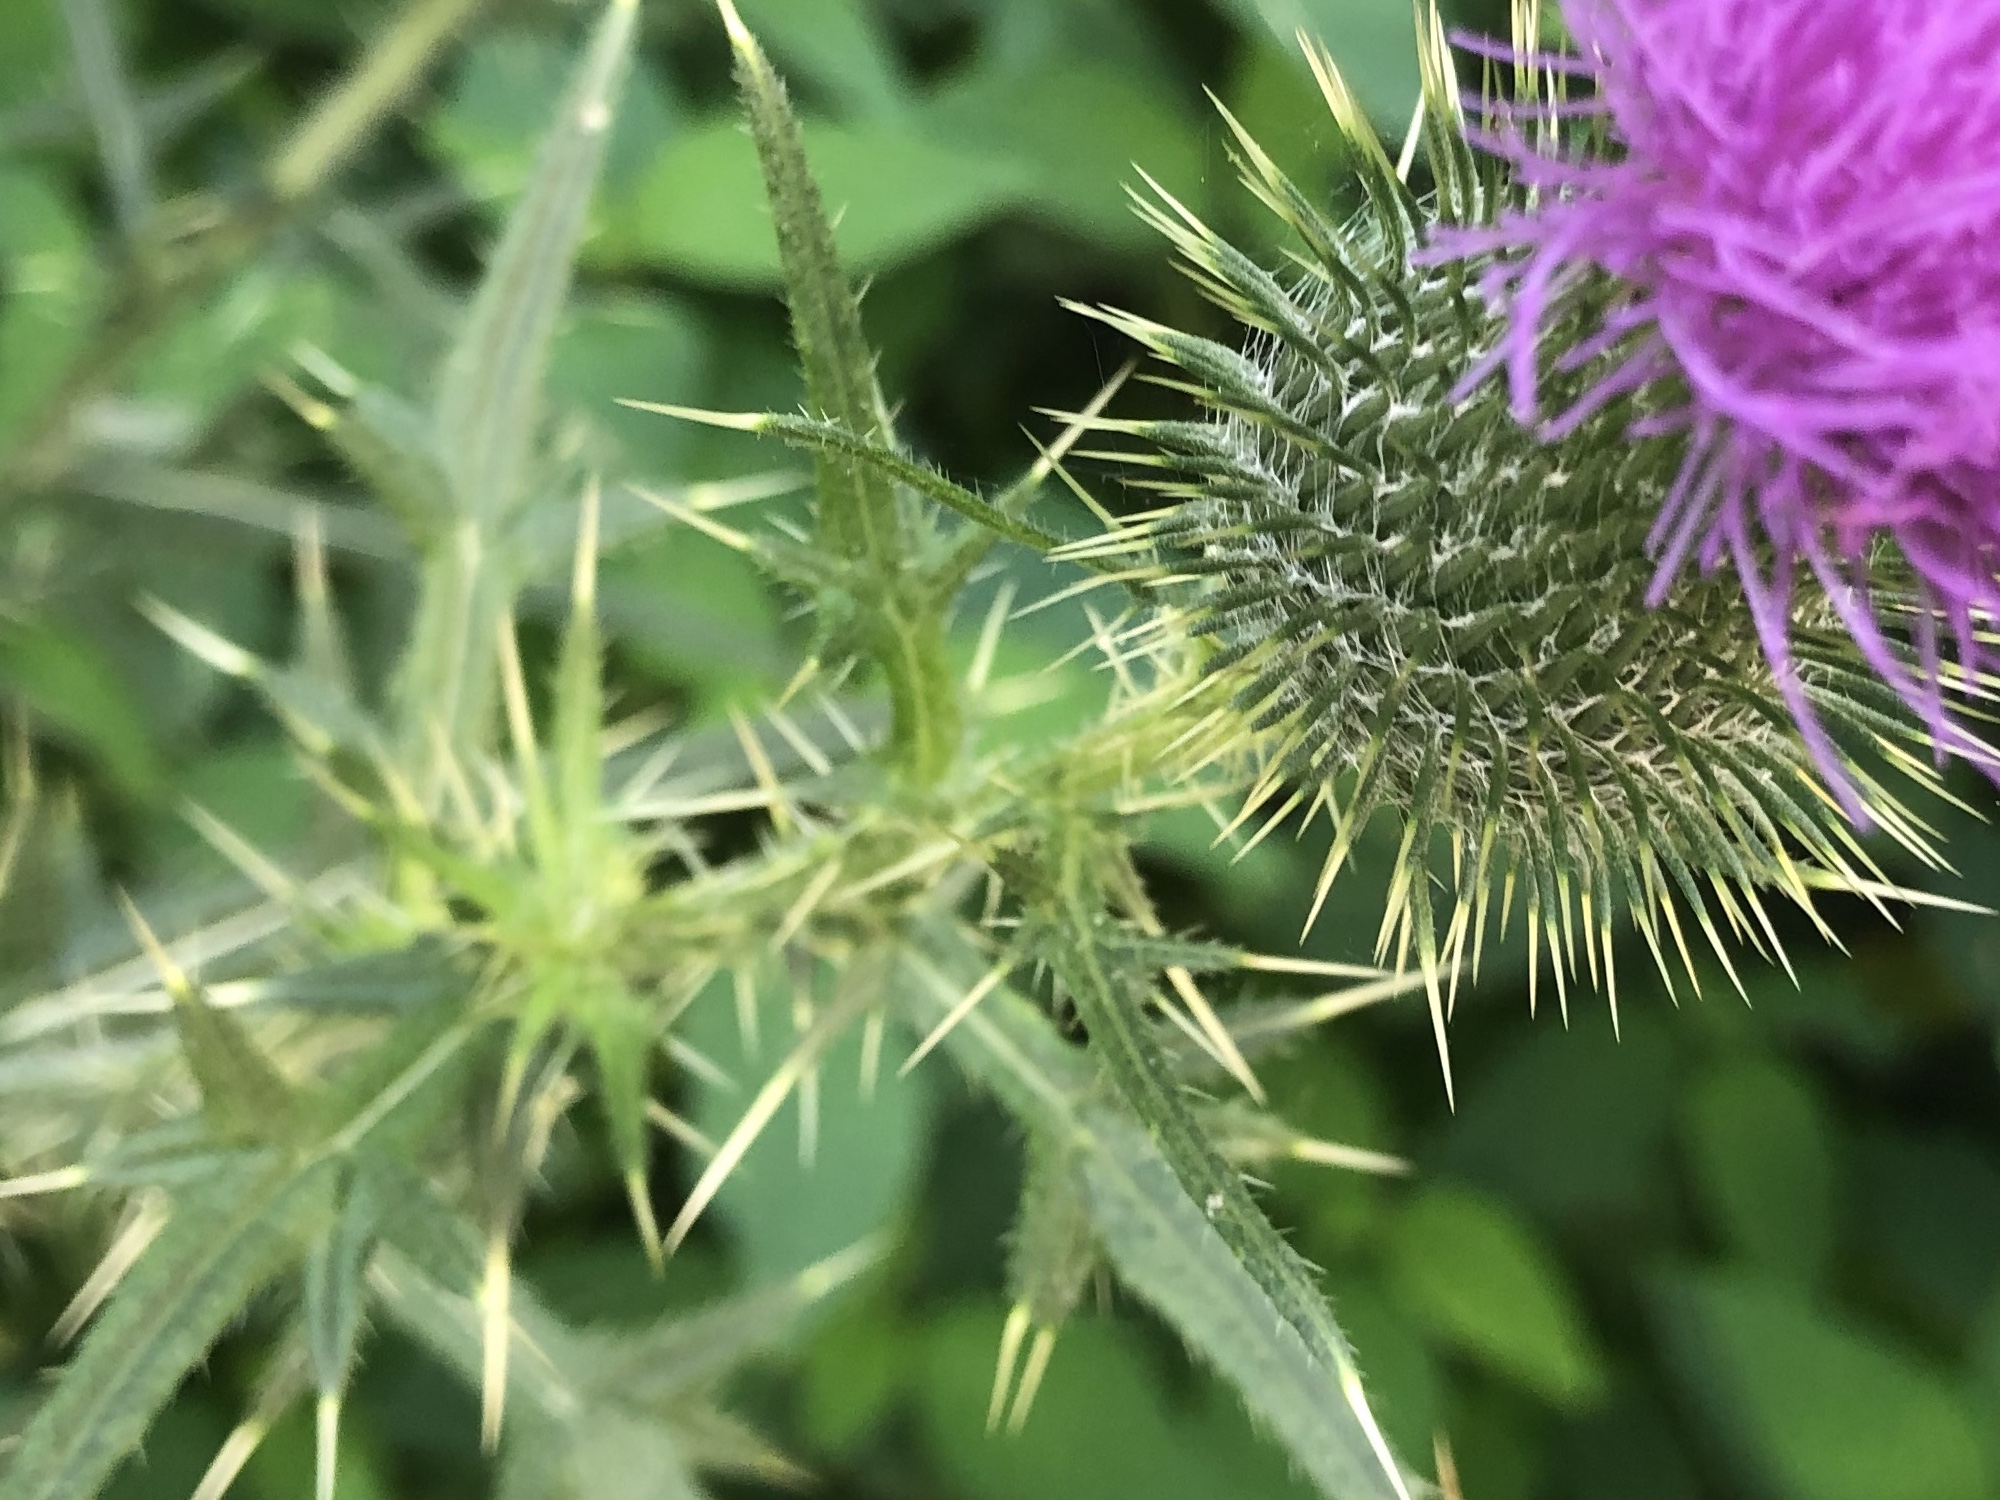 Bull Thistle in in woods near Marion Dunn Pond and Oak Savanna in Madison, Wisconsin on August 21, 2019.